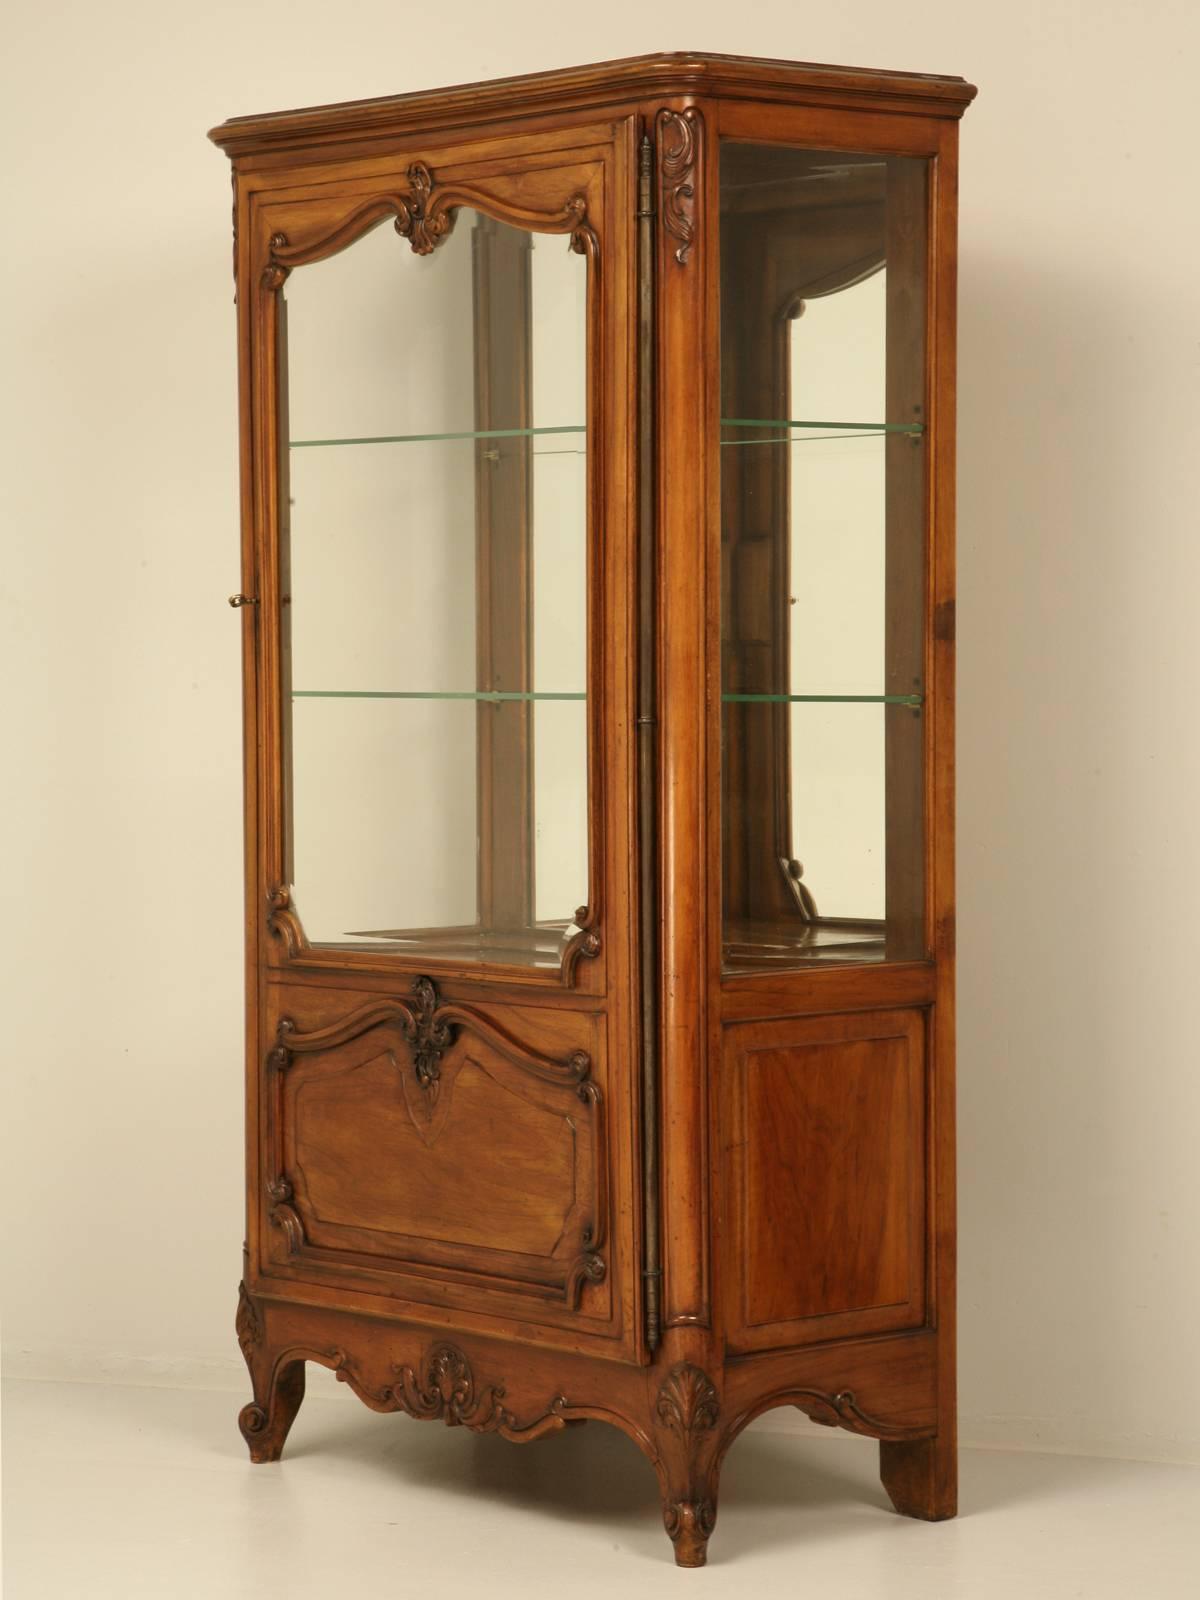 Vintage French Louis XV style curio cabinet that we imported many years ago and just repurchased from our client. The curio, or as the French would call a vitrine cabinet is in excellent condition and was obviously very well taken care of.